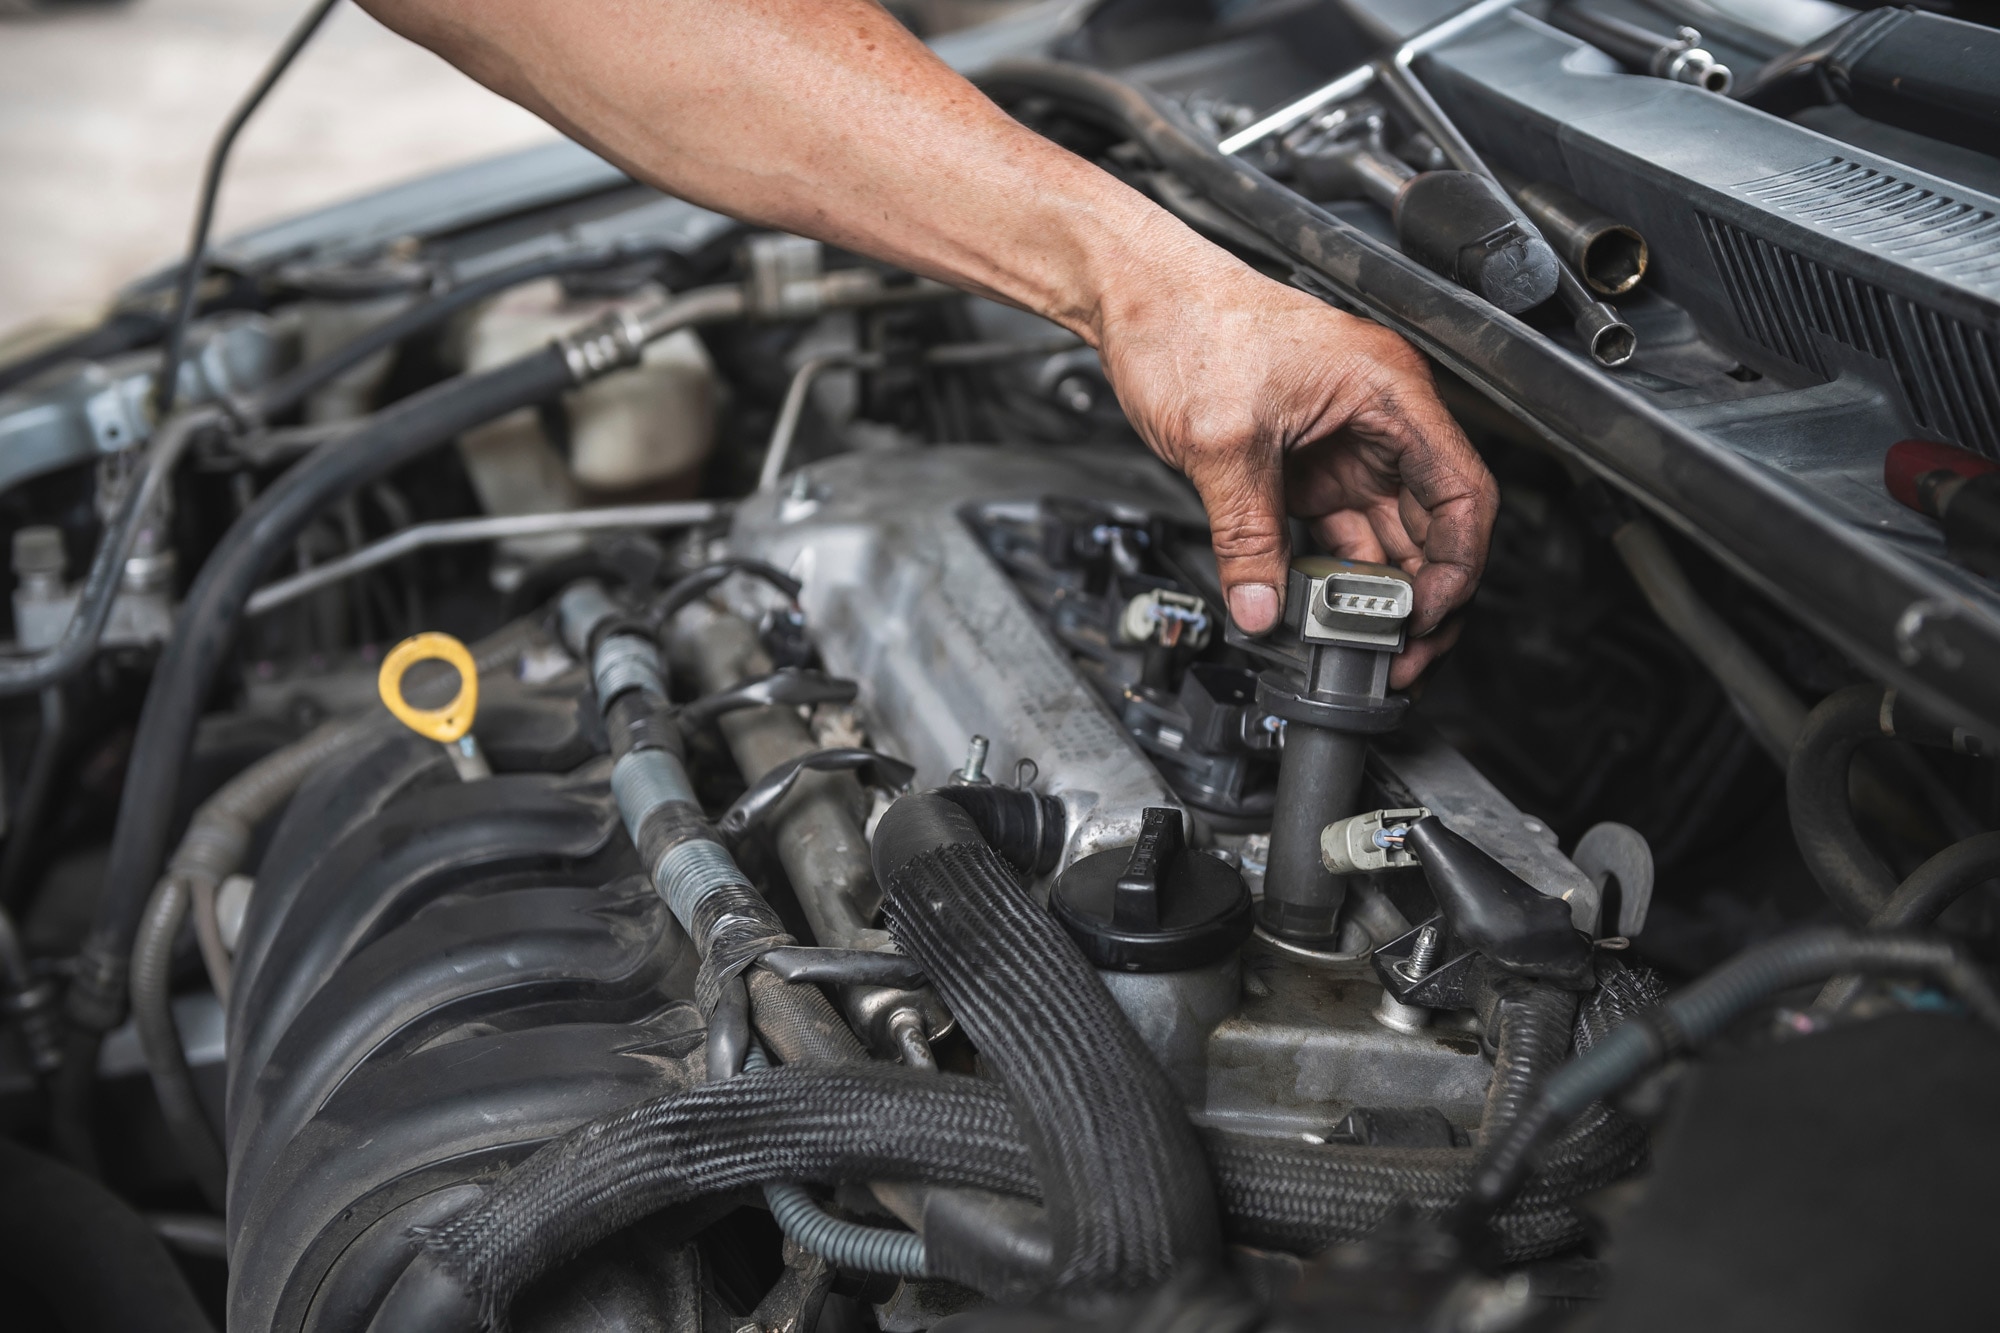 What Is an Ignition Coil? | Capital One Auto Navigator